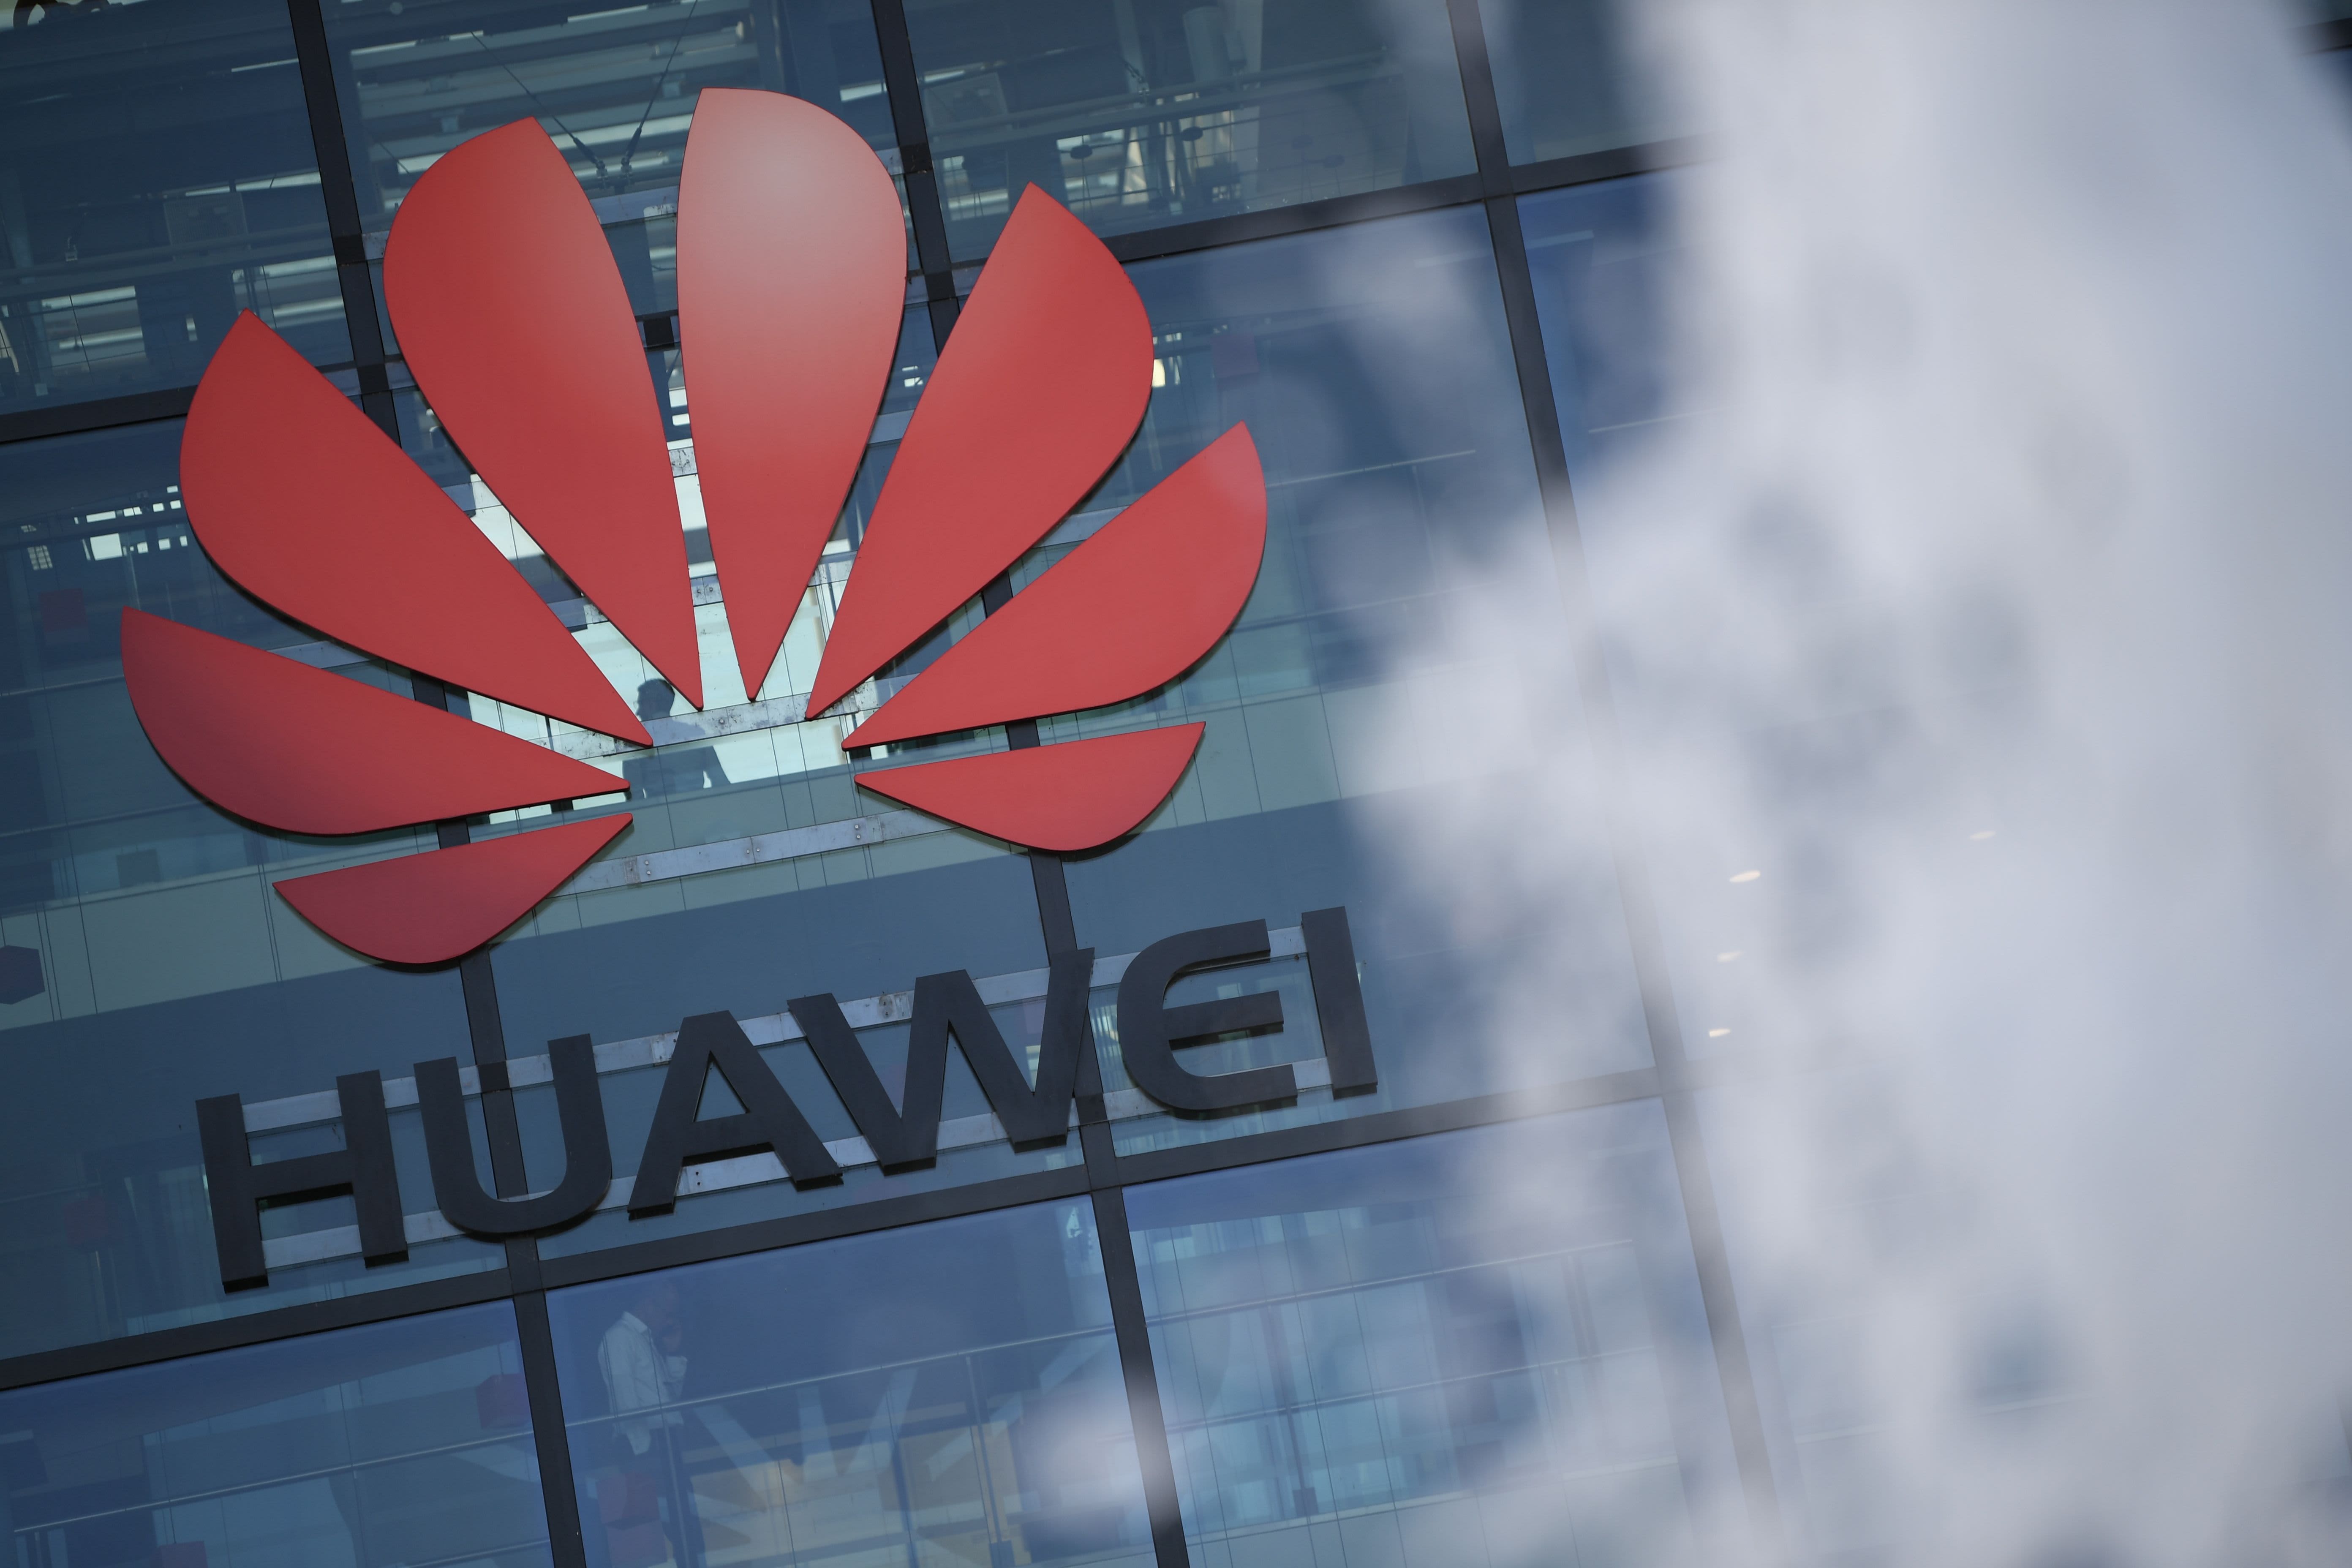 Huawei overtakes Samsung to be No. 1 smartphone maker thanks to China